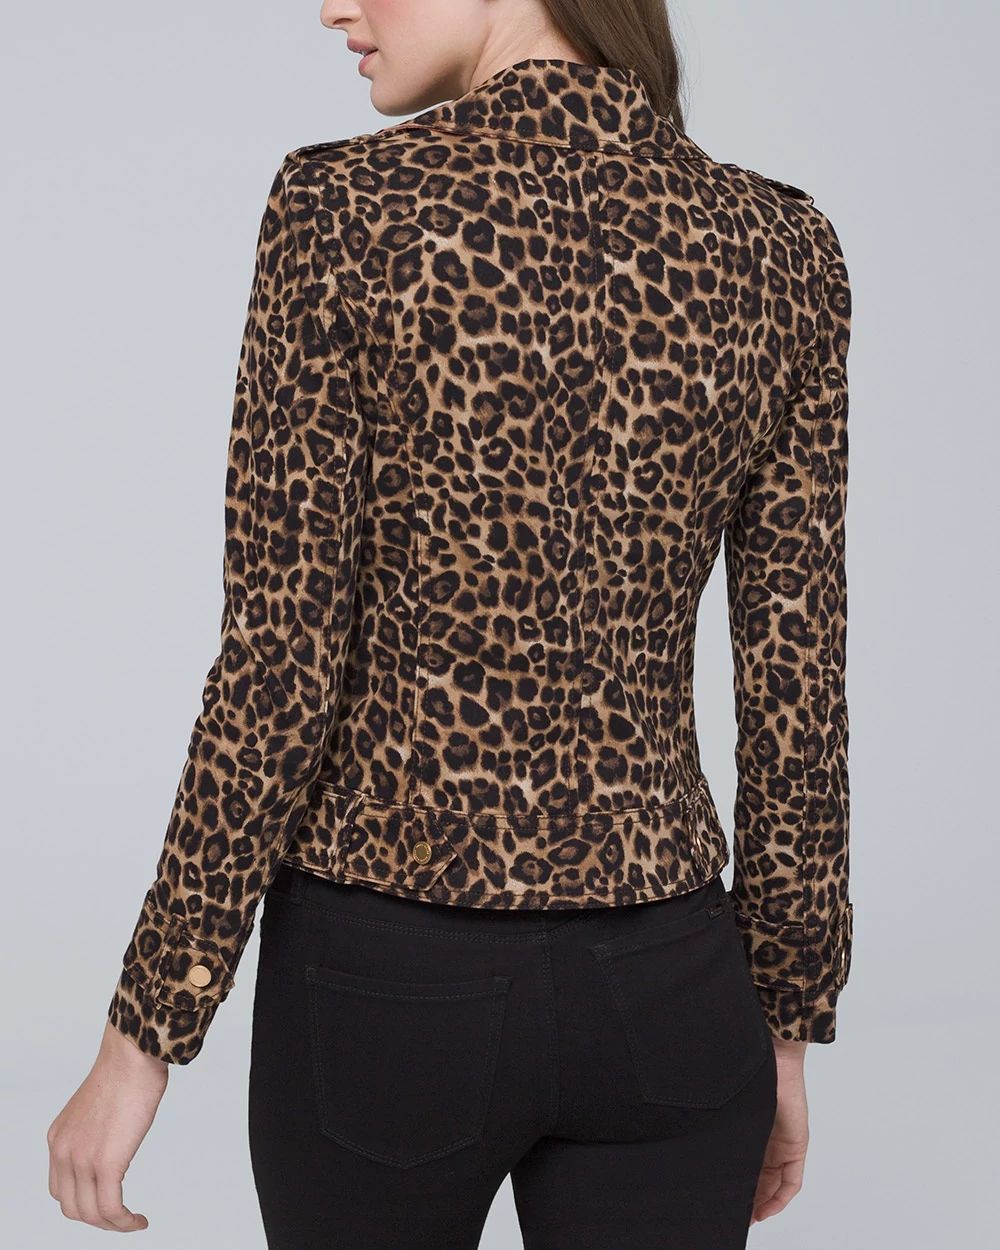 Leopard Moto Jacket click to view larger image.